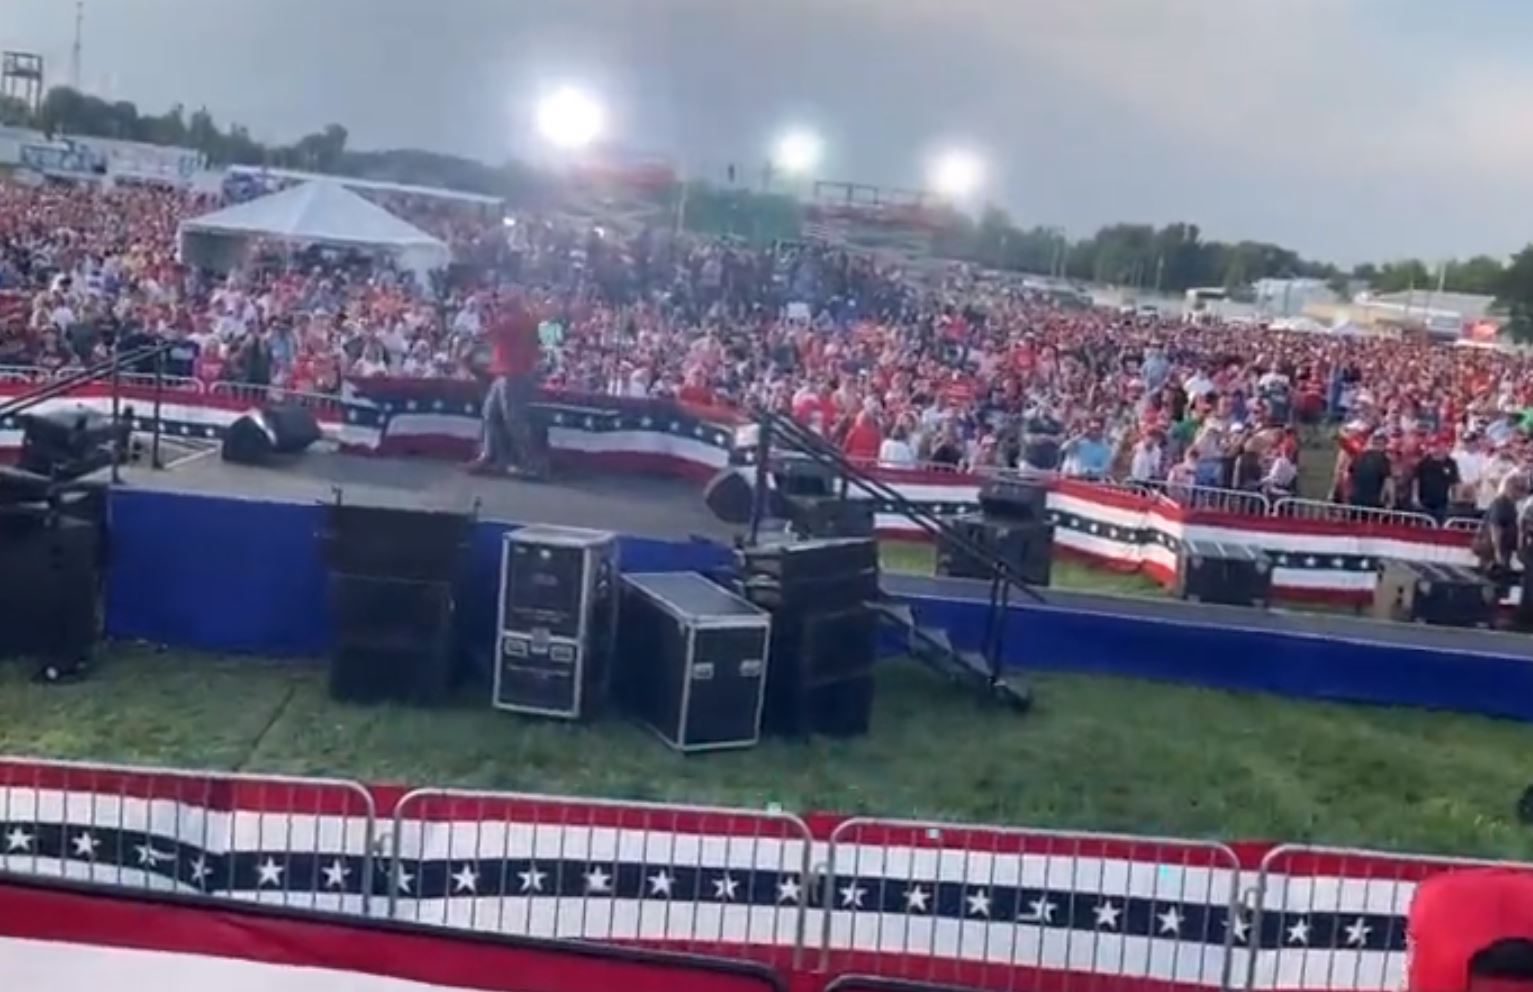  MASSIVE CROWD in Wellington, Ohio – Reports of 35,000-45,000 at Trump’s First Big Rally of Summer (VIDEO)